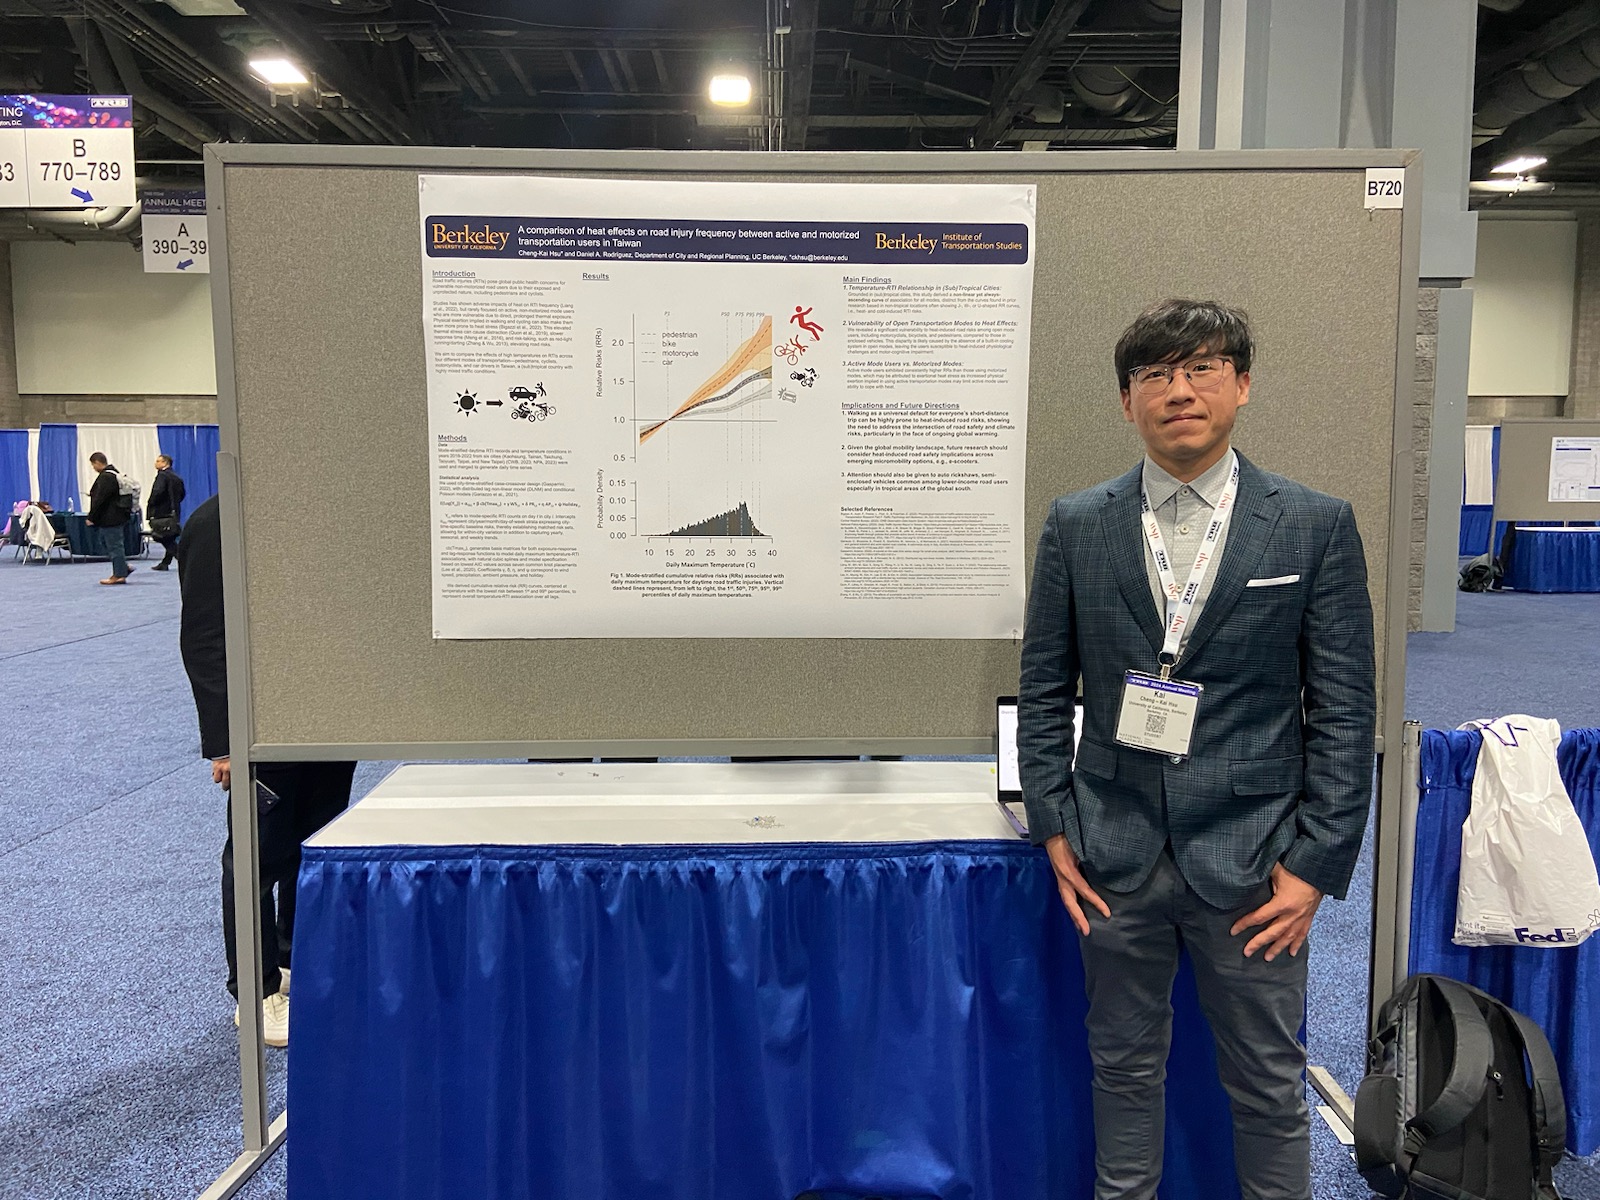 City ans Regional PLanning doctoral student Cheng-Kai Hsu presents his poster on Motorcycle Operation and Safety Research